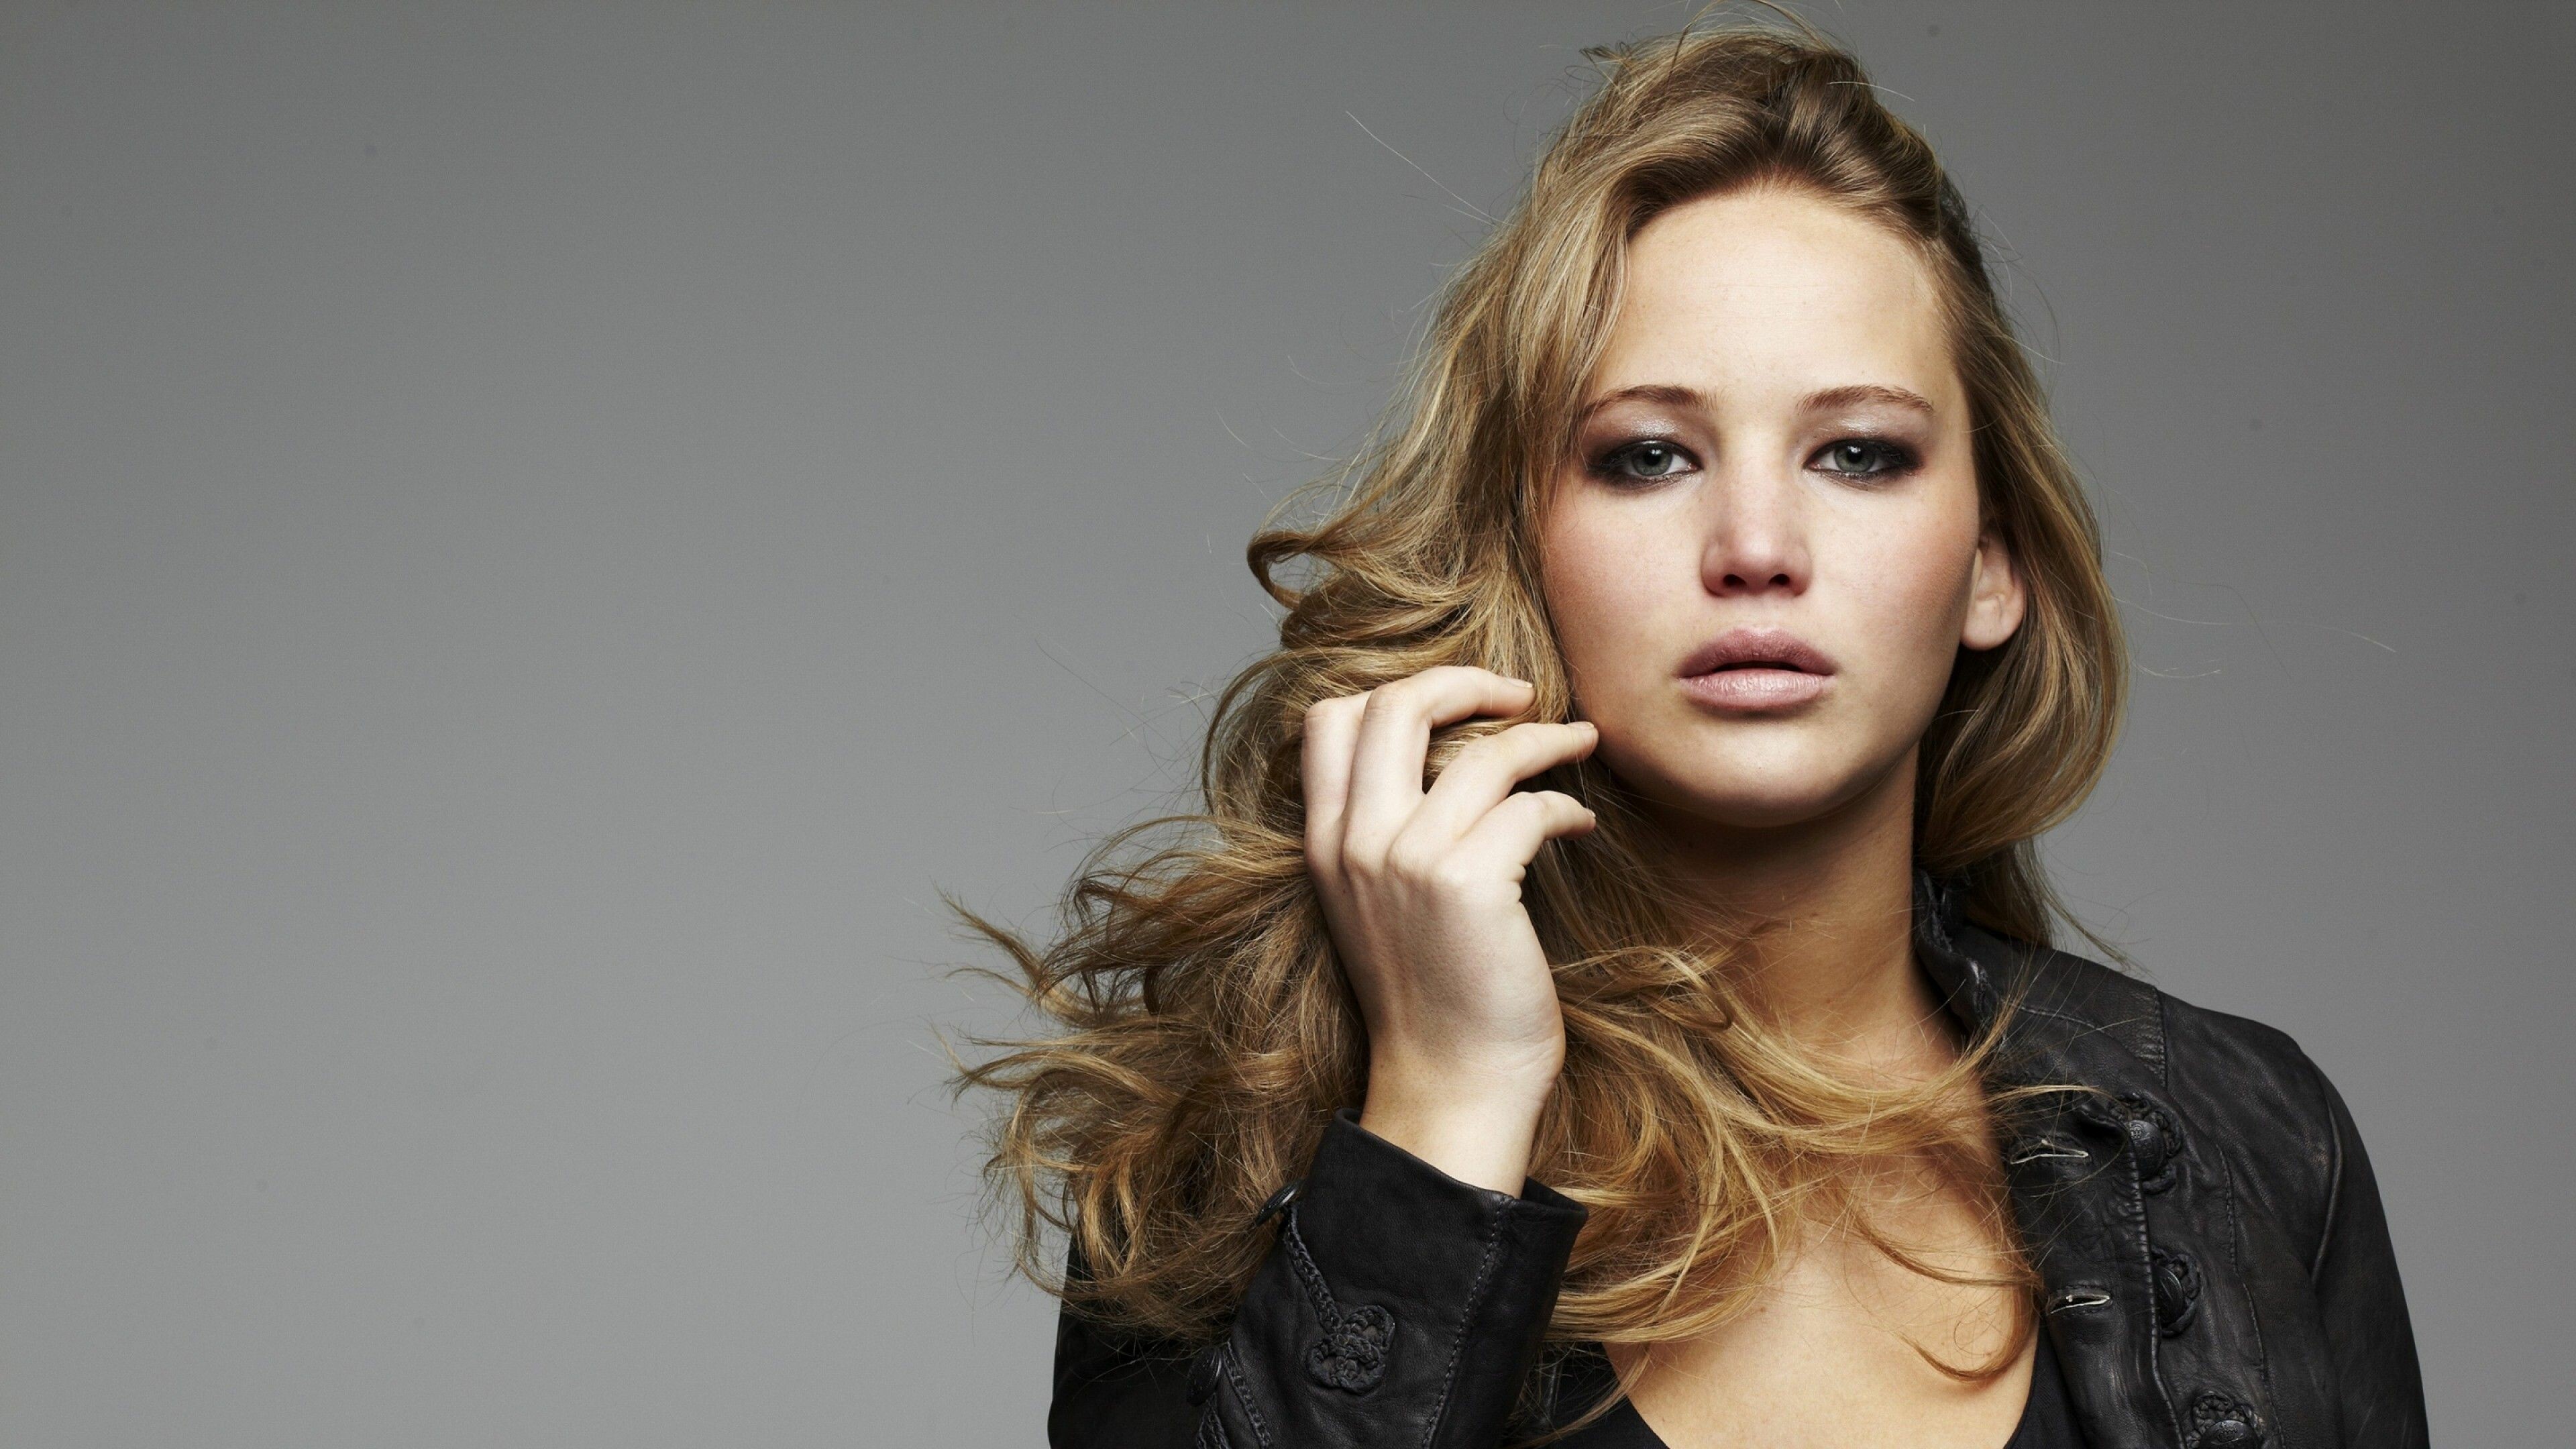 Jennifer Lawrence: Portrayed Lauren Pearson in a sitcom, The Bill Engvall Show. 3840x2160 4K Background.